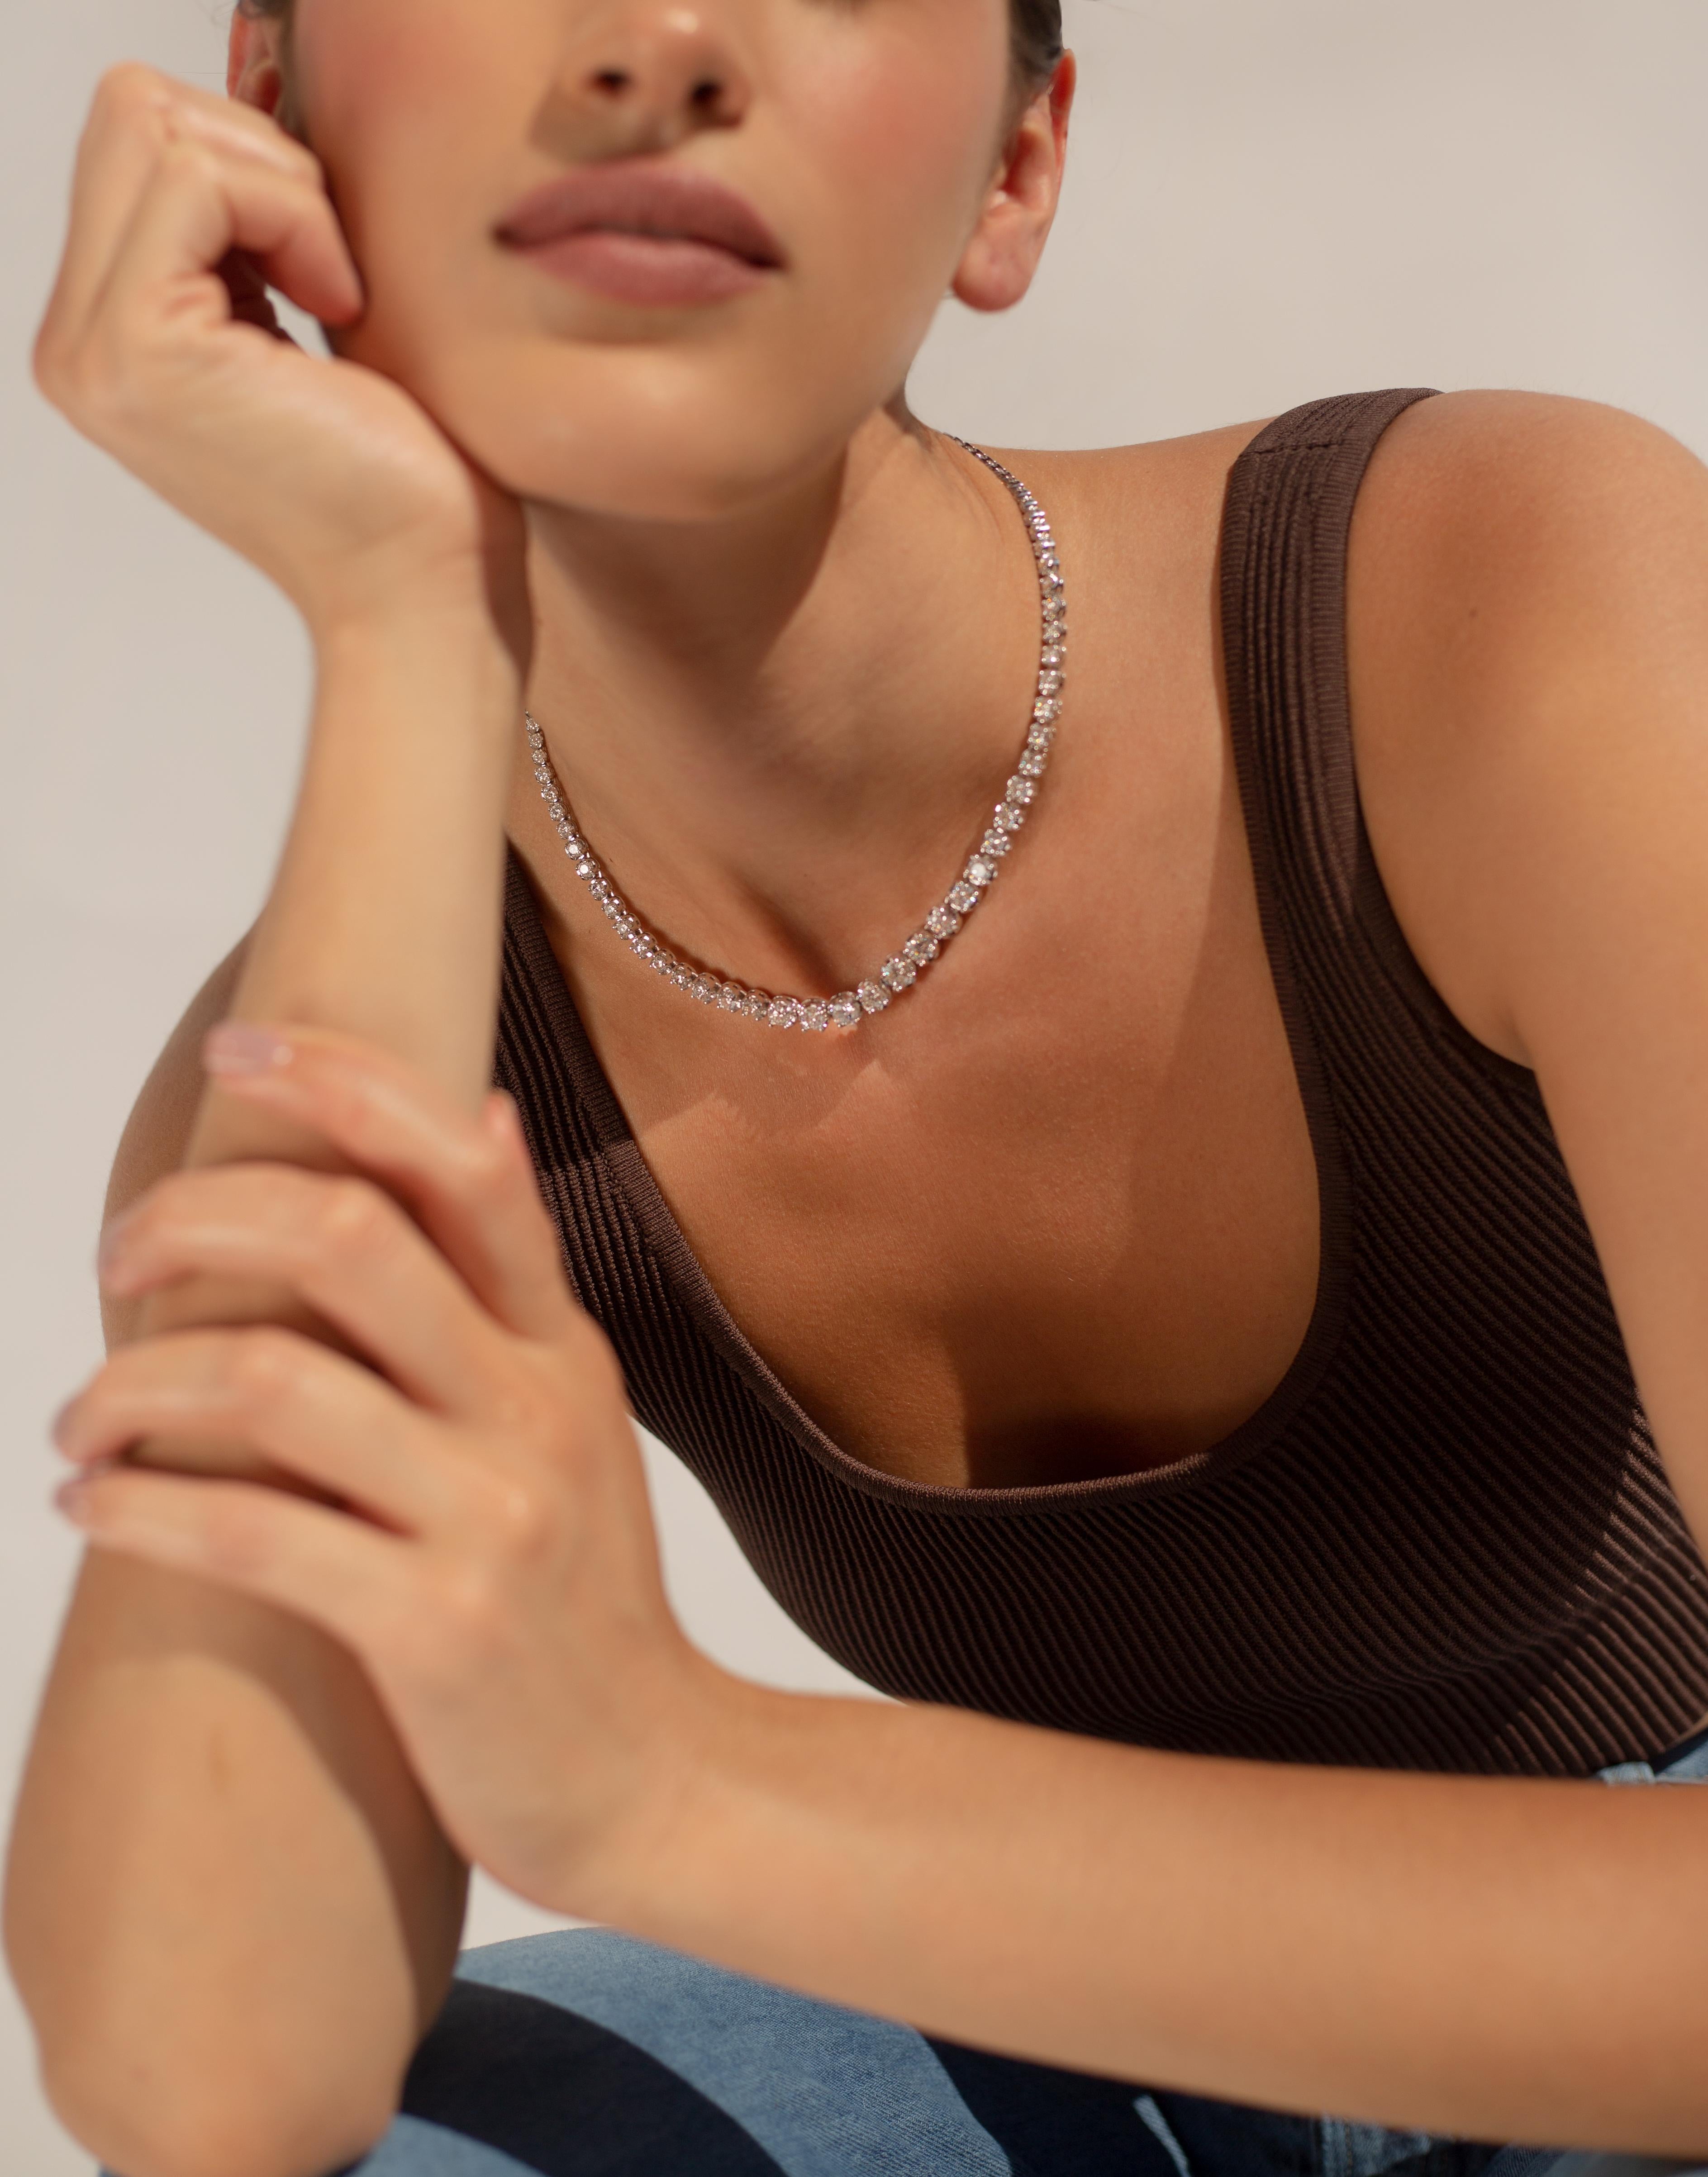 This graduated  set tennis necklace is a classic piece that never goes out of style.  
Available in 14K White Gold, Yellow Gold, or Rose Gold
Diamond quality is G-H, SI
Diamond weight = 14 carats
Center stone weight = 0.87 carats
Necklace length =